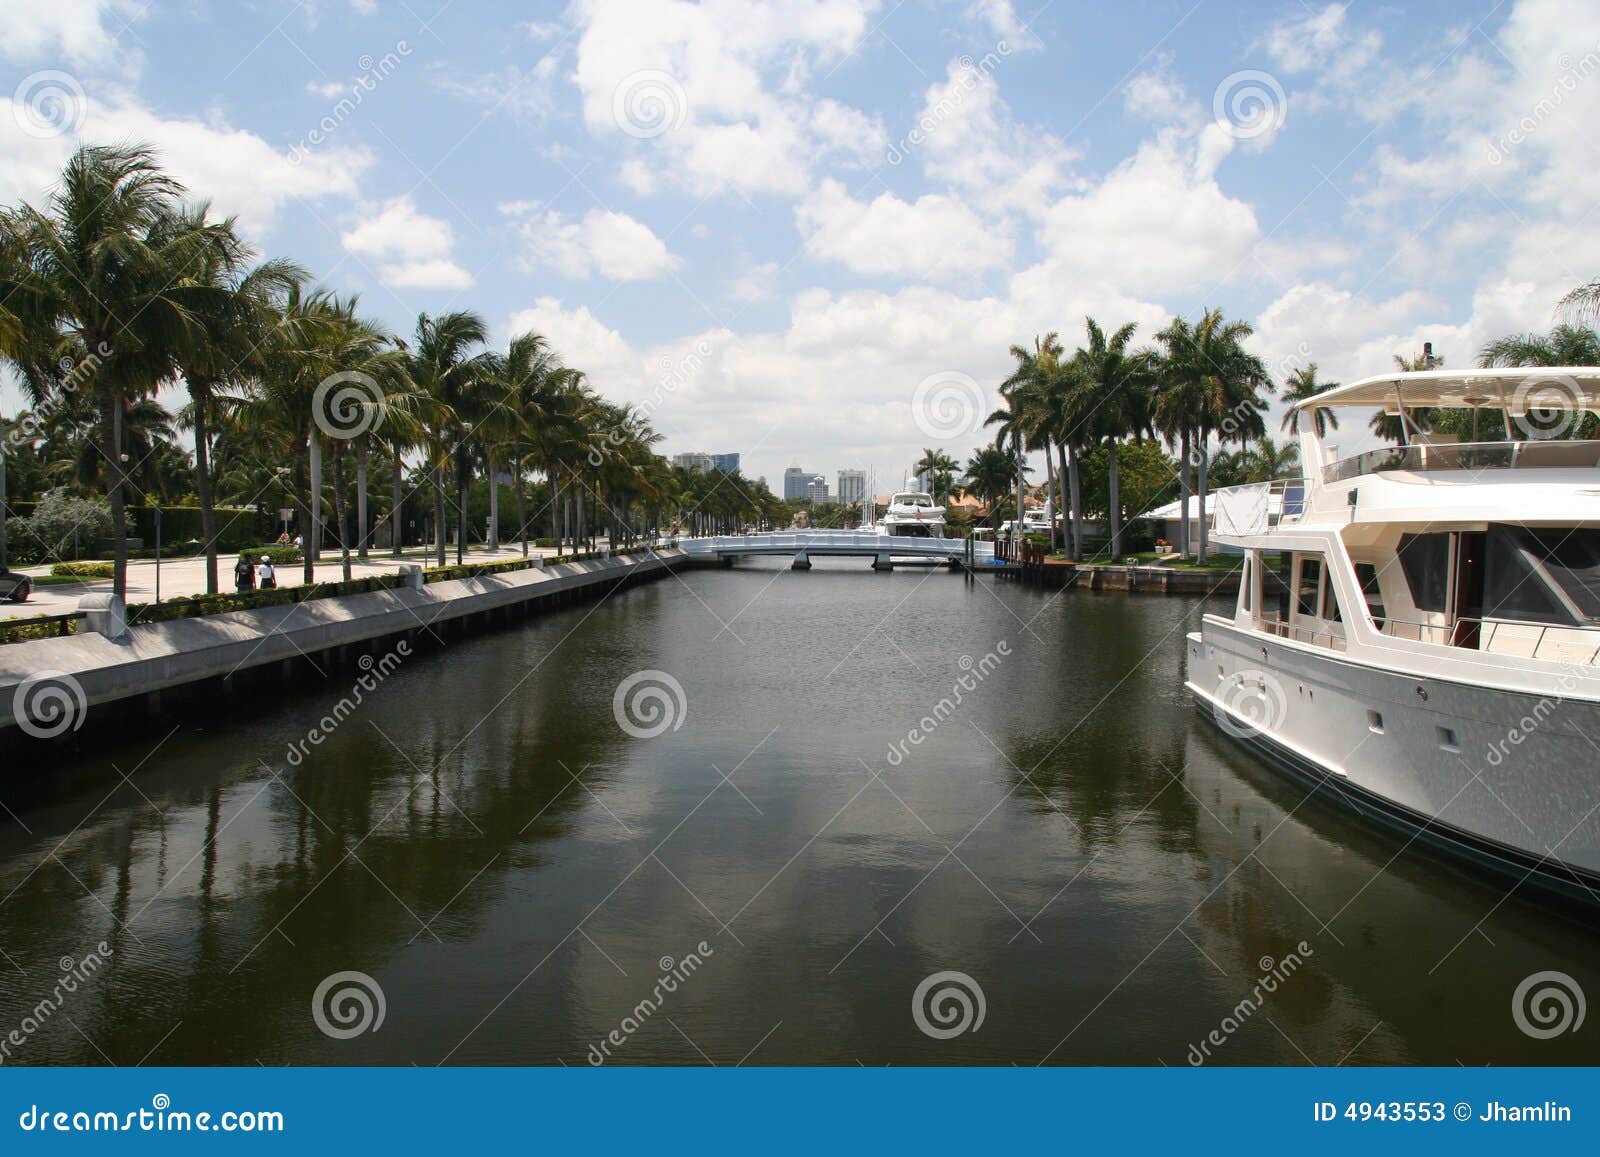 ft. lauderdale canal